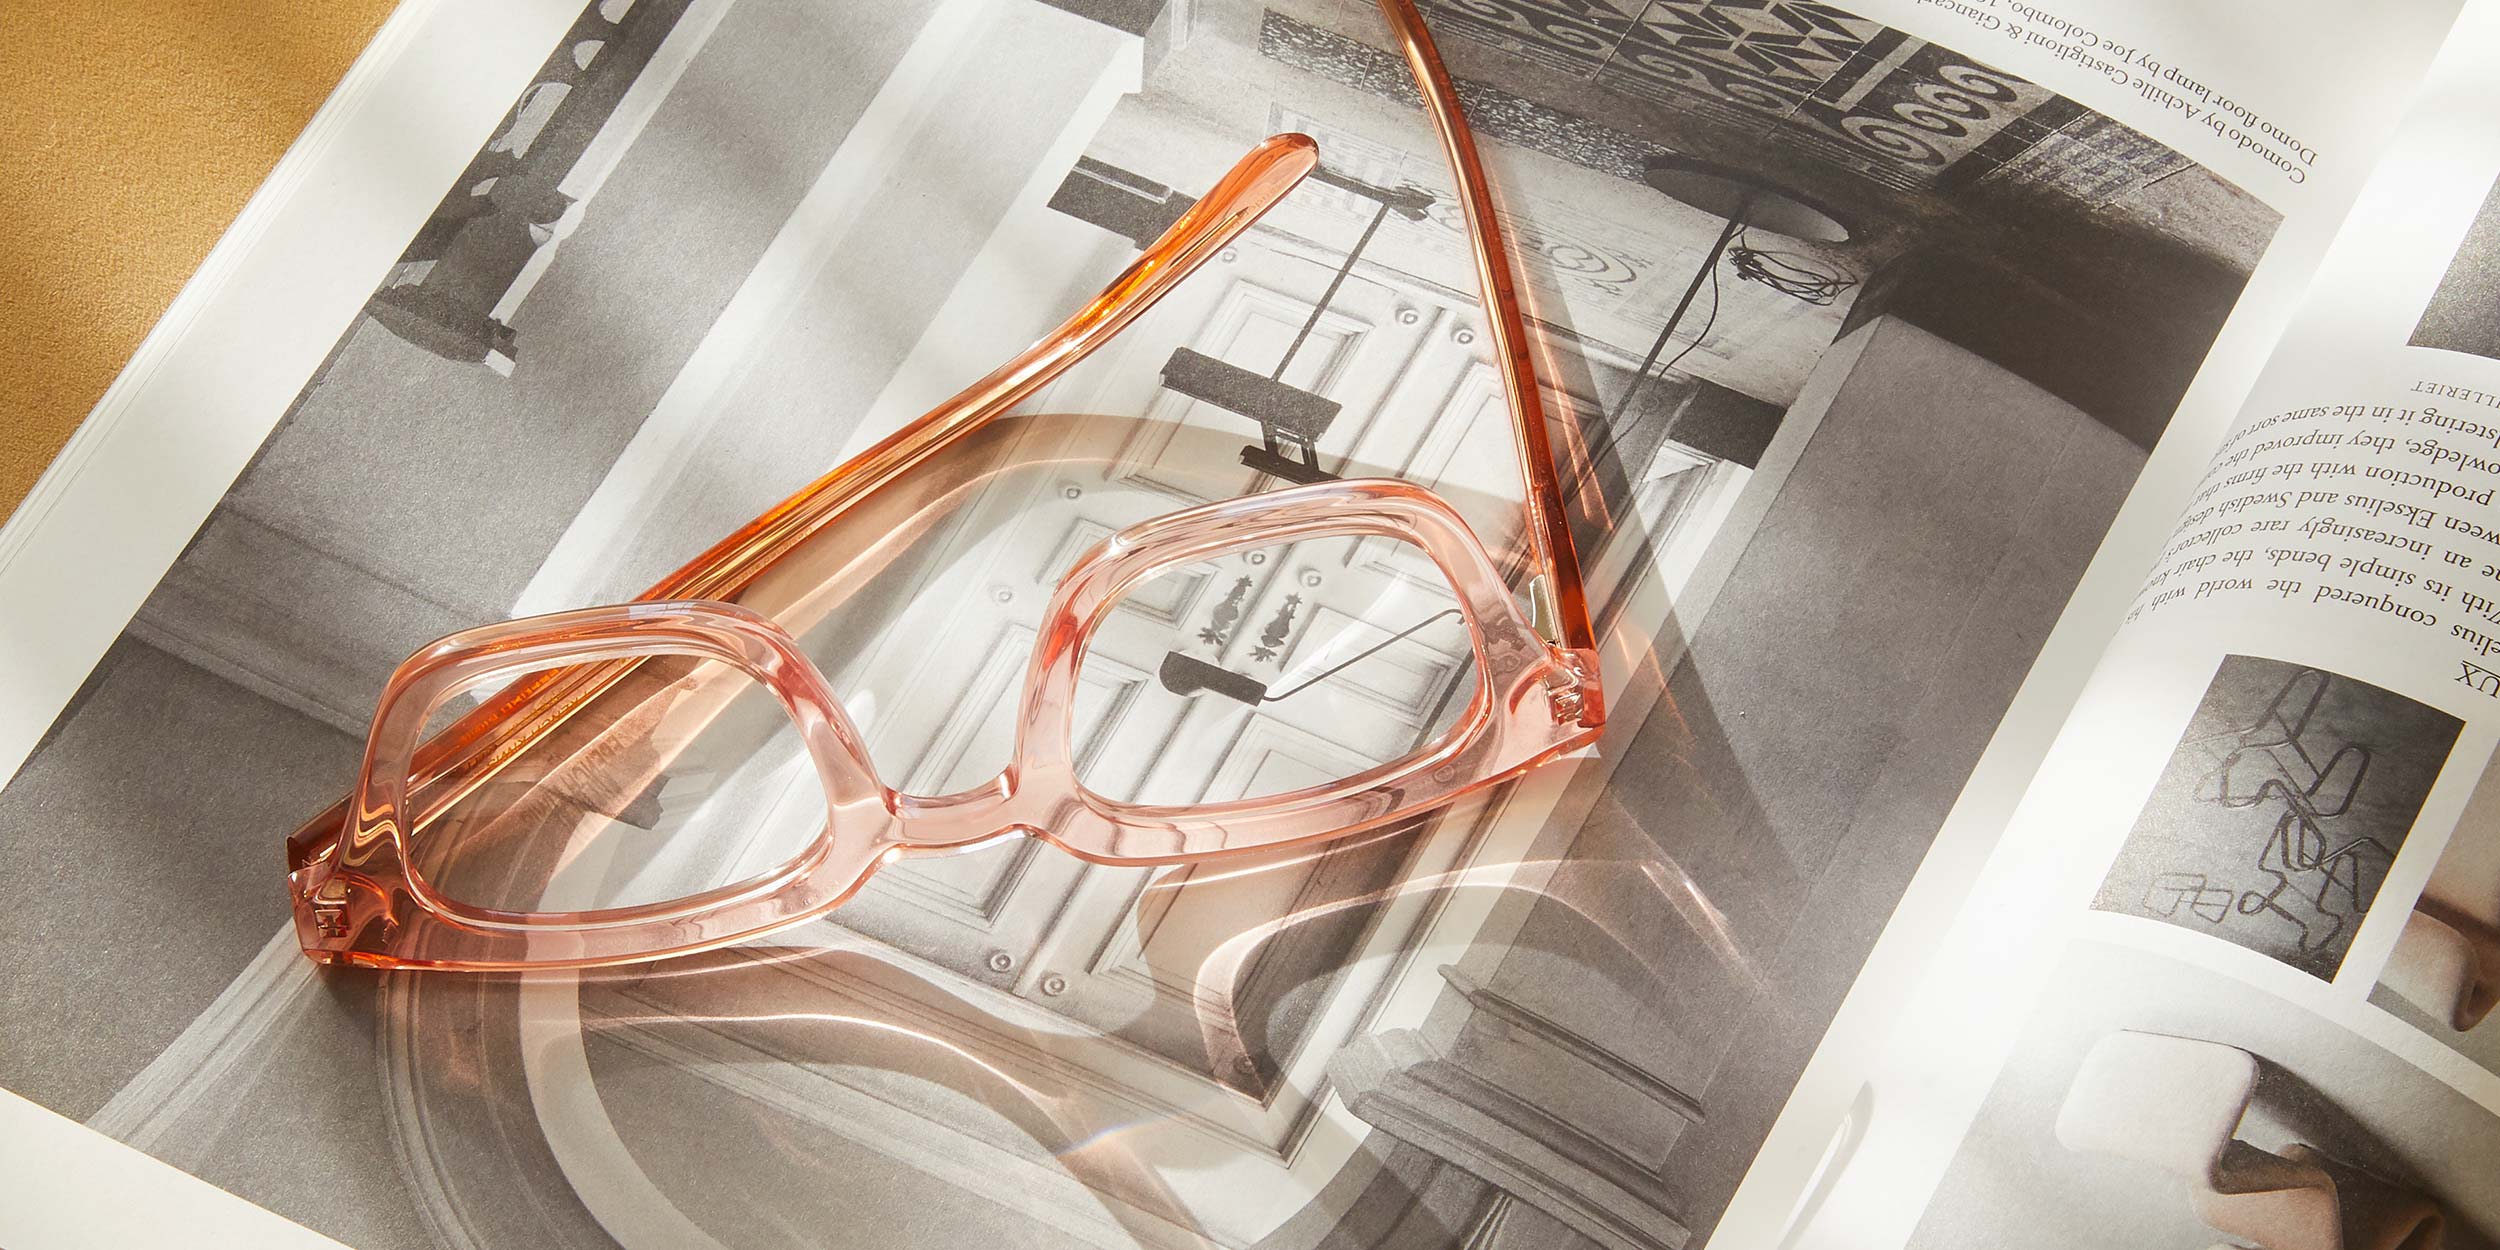 Photo Details of Ysée Nude Tortoise Reading Glasses in a room